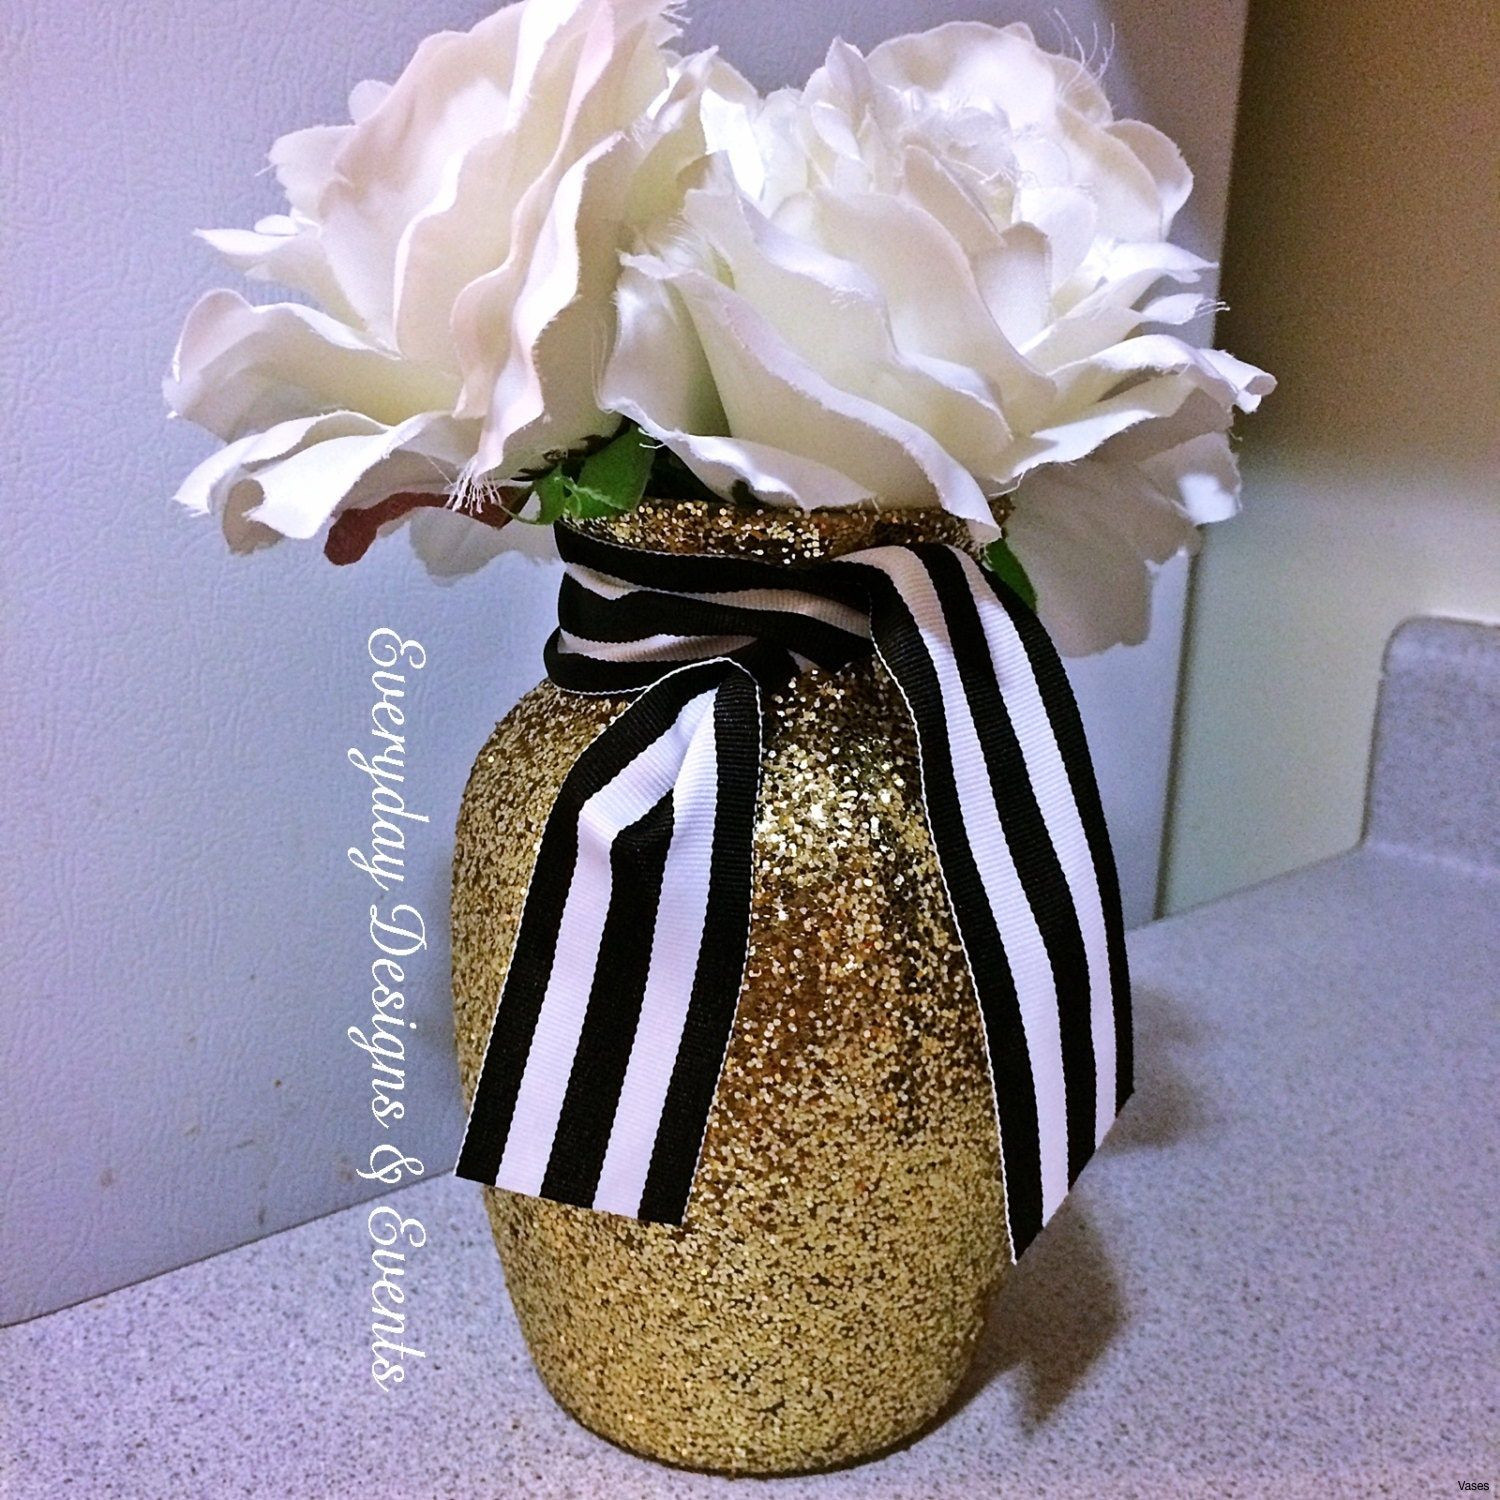 20 Nice Mason Jar Vases with Ribbon 2022 free download mason jar vases with ribbon of white and gold vase awesome luxury flower picture in black and white throughout white and gold vase awesome luxury flower picture in black and white